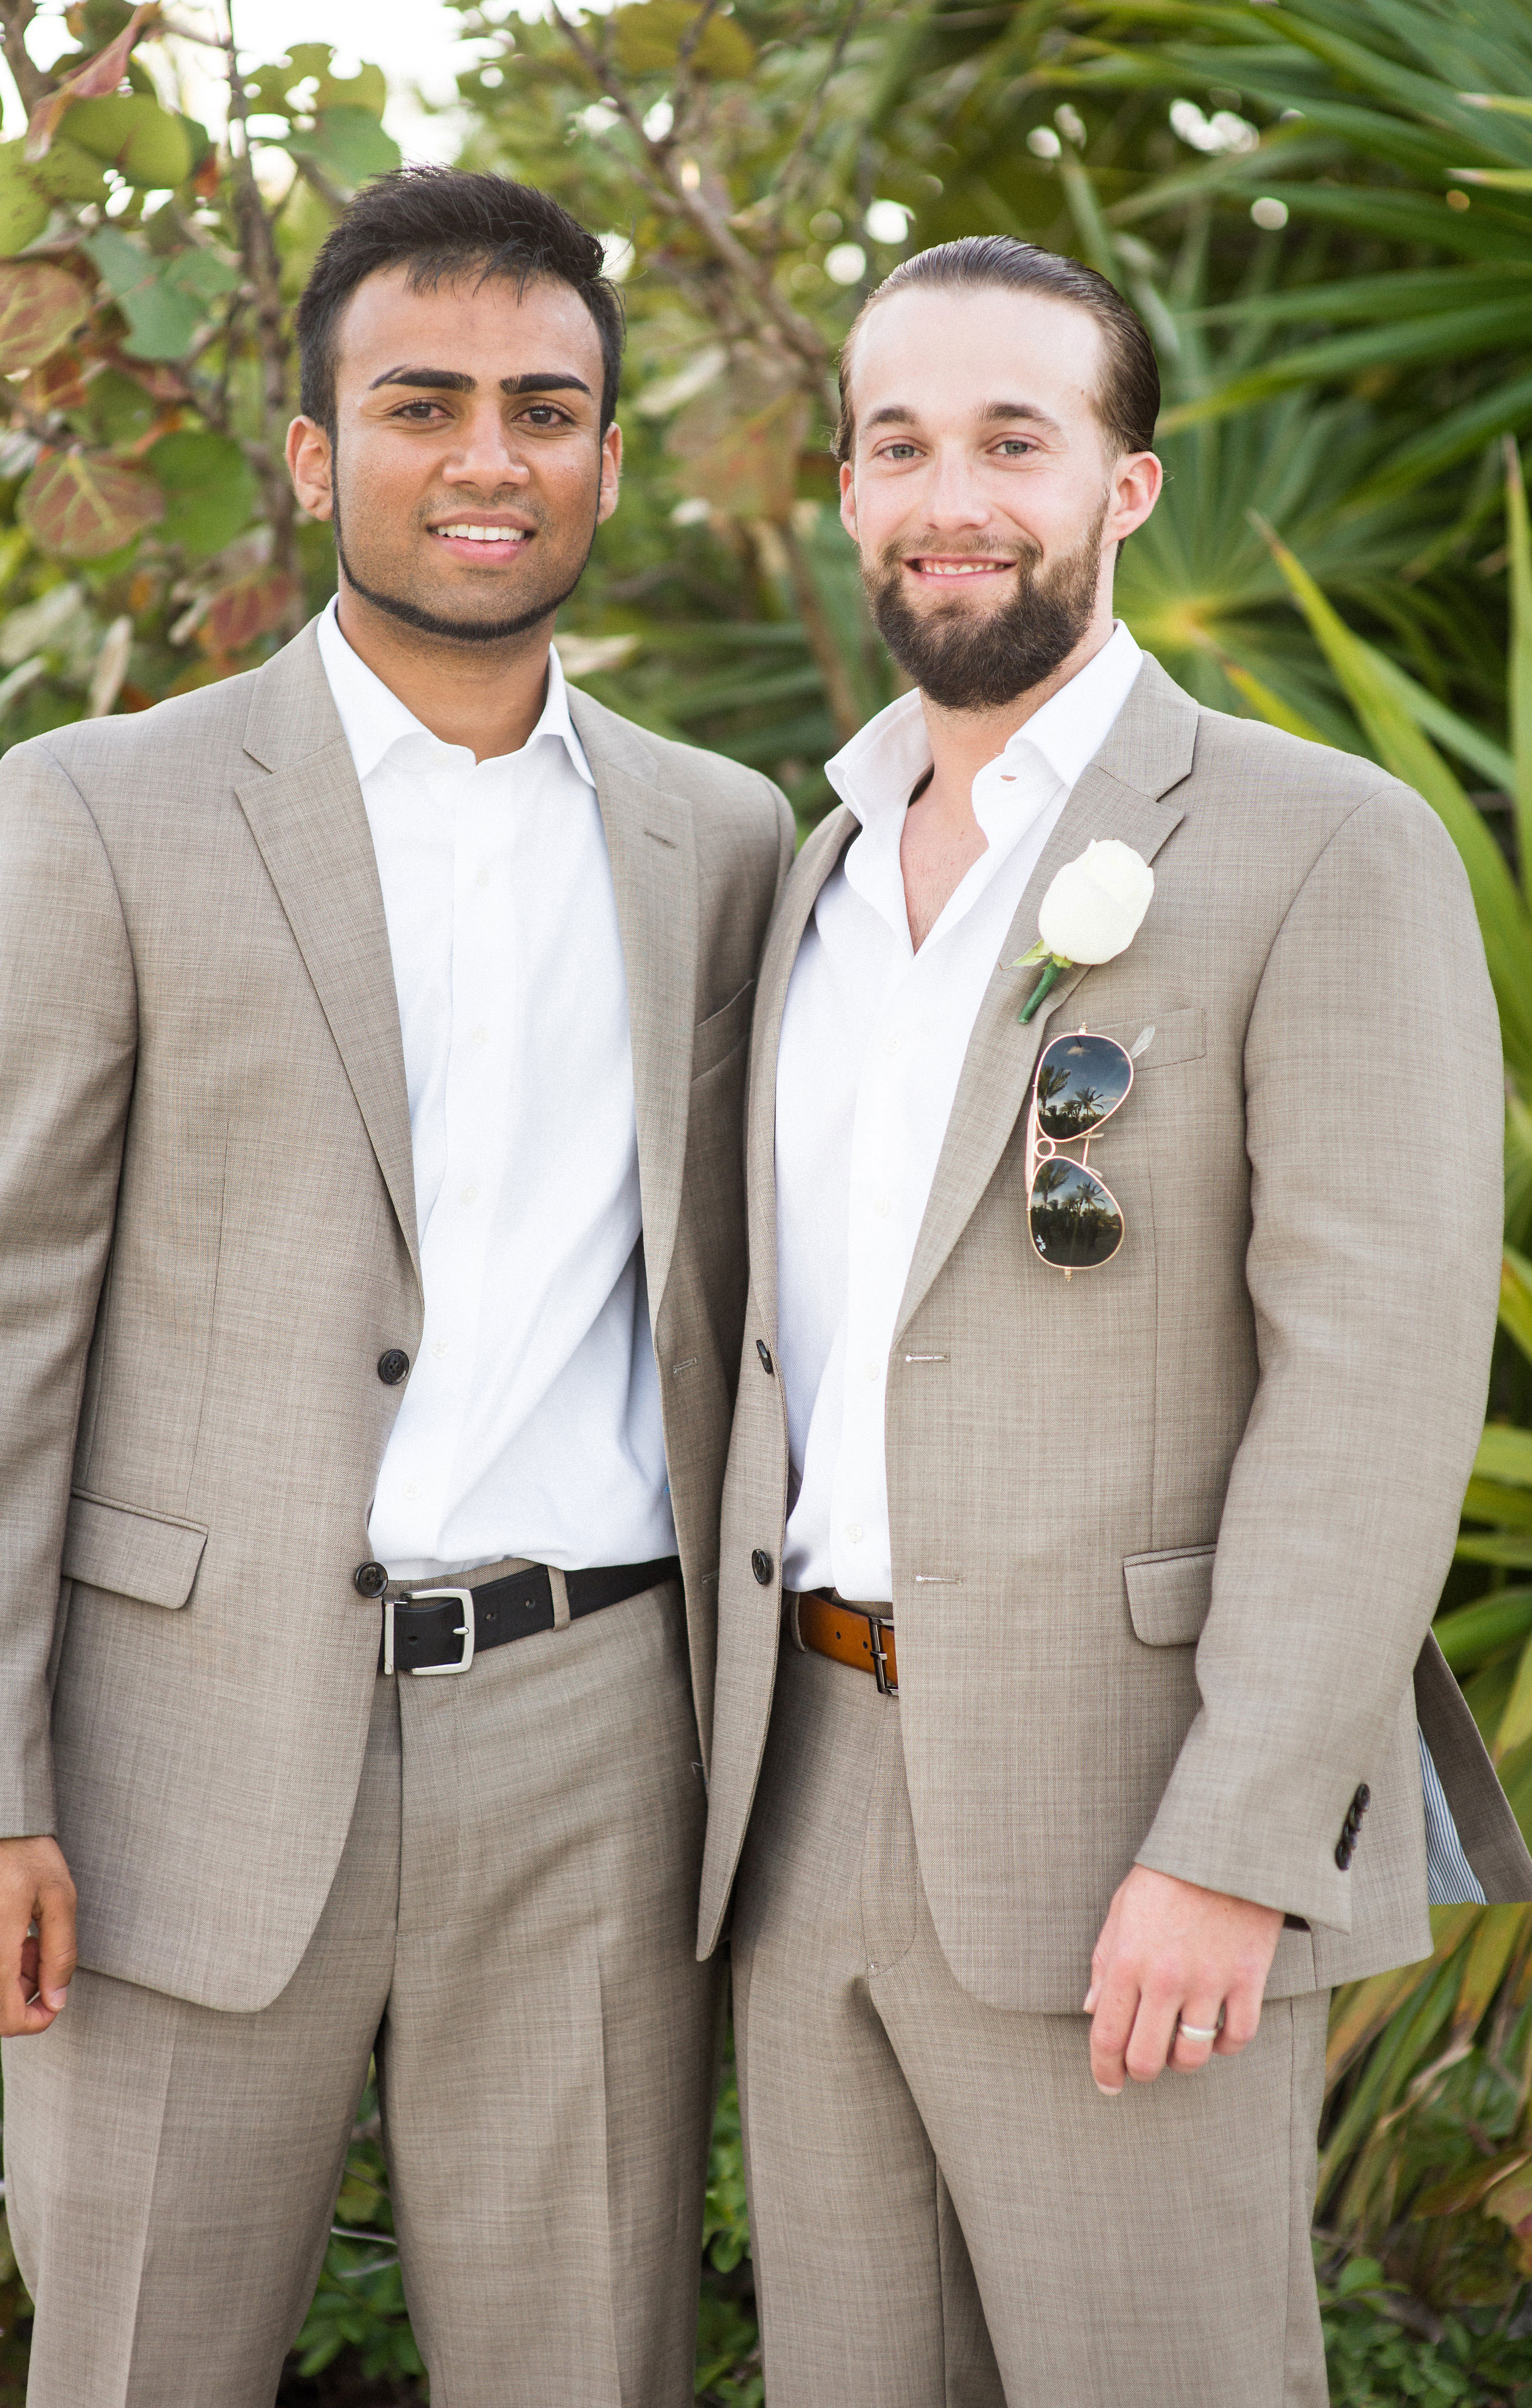 Groom and groomsmen in tan suits for beach wedding.  Destination wedding in Mexico.